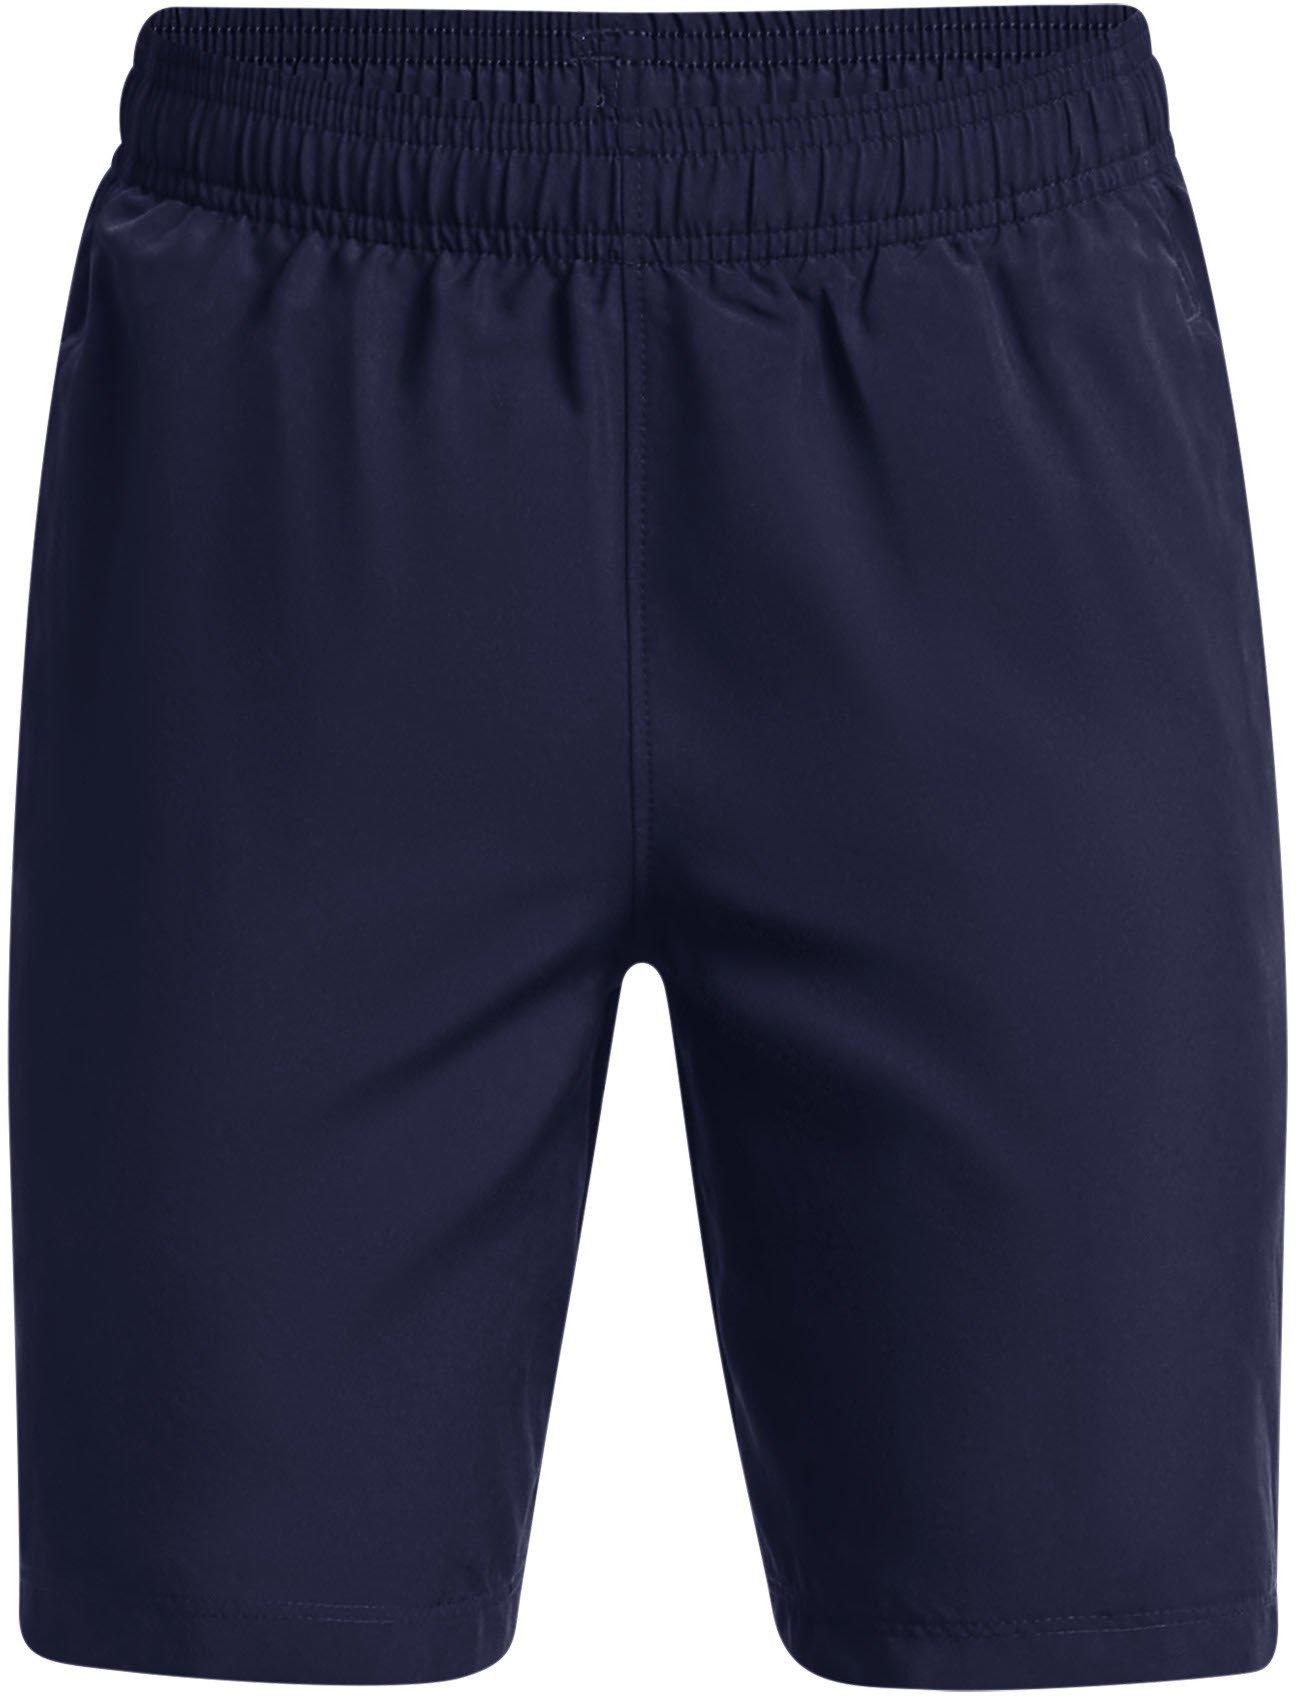 Under Armour Woven Graphic Shorts-NVY XS